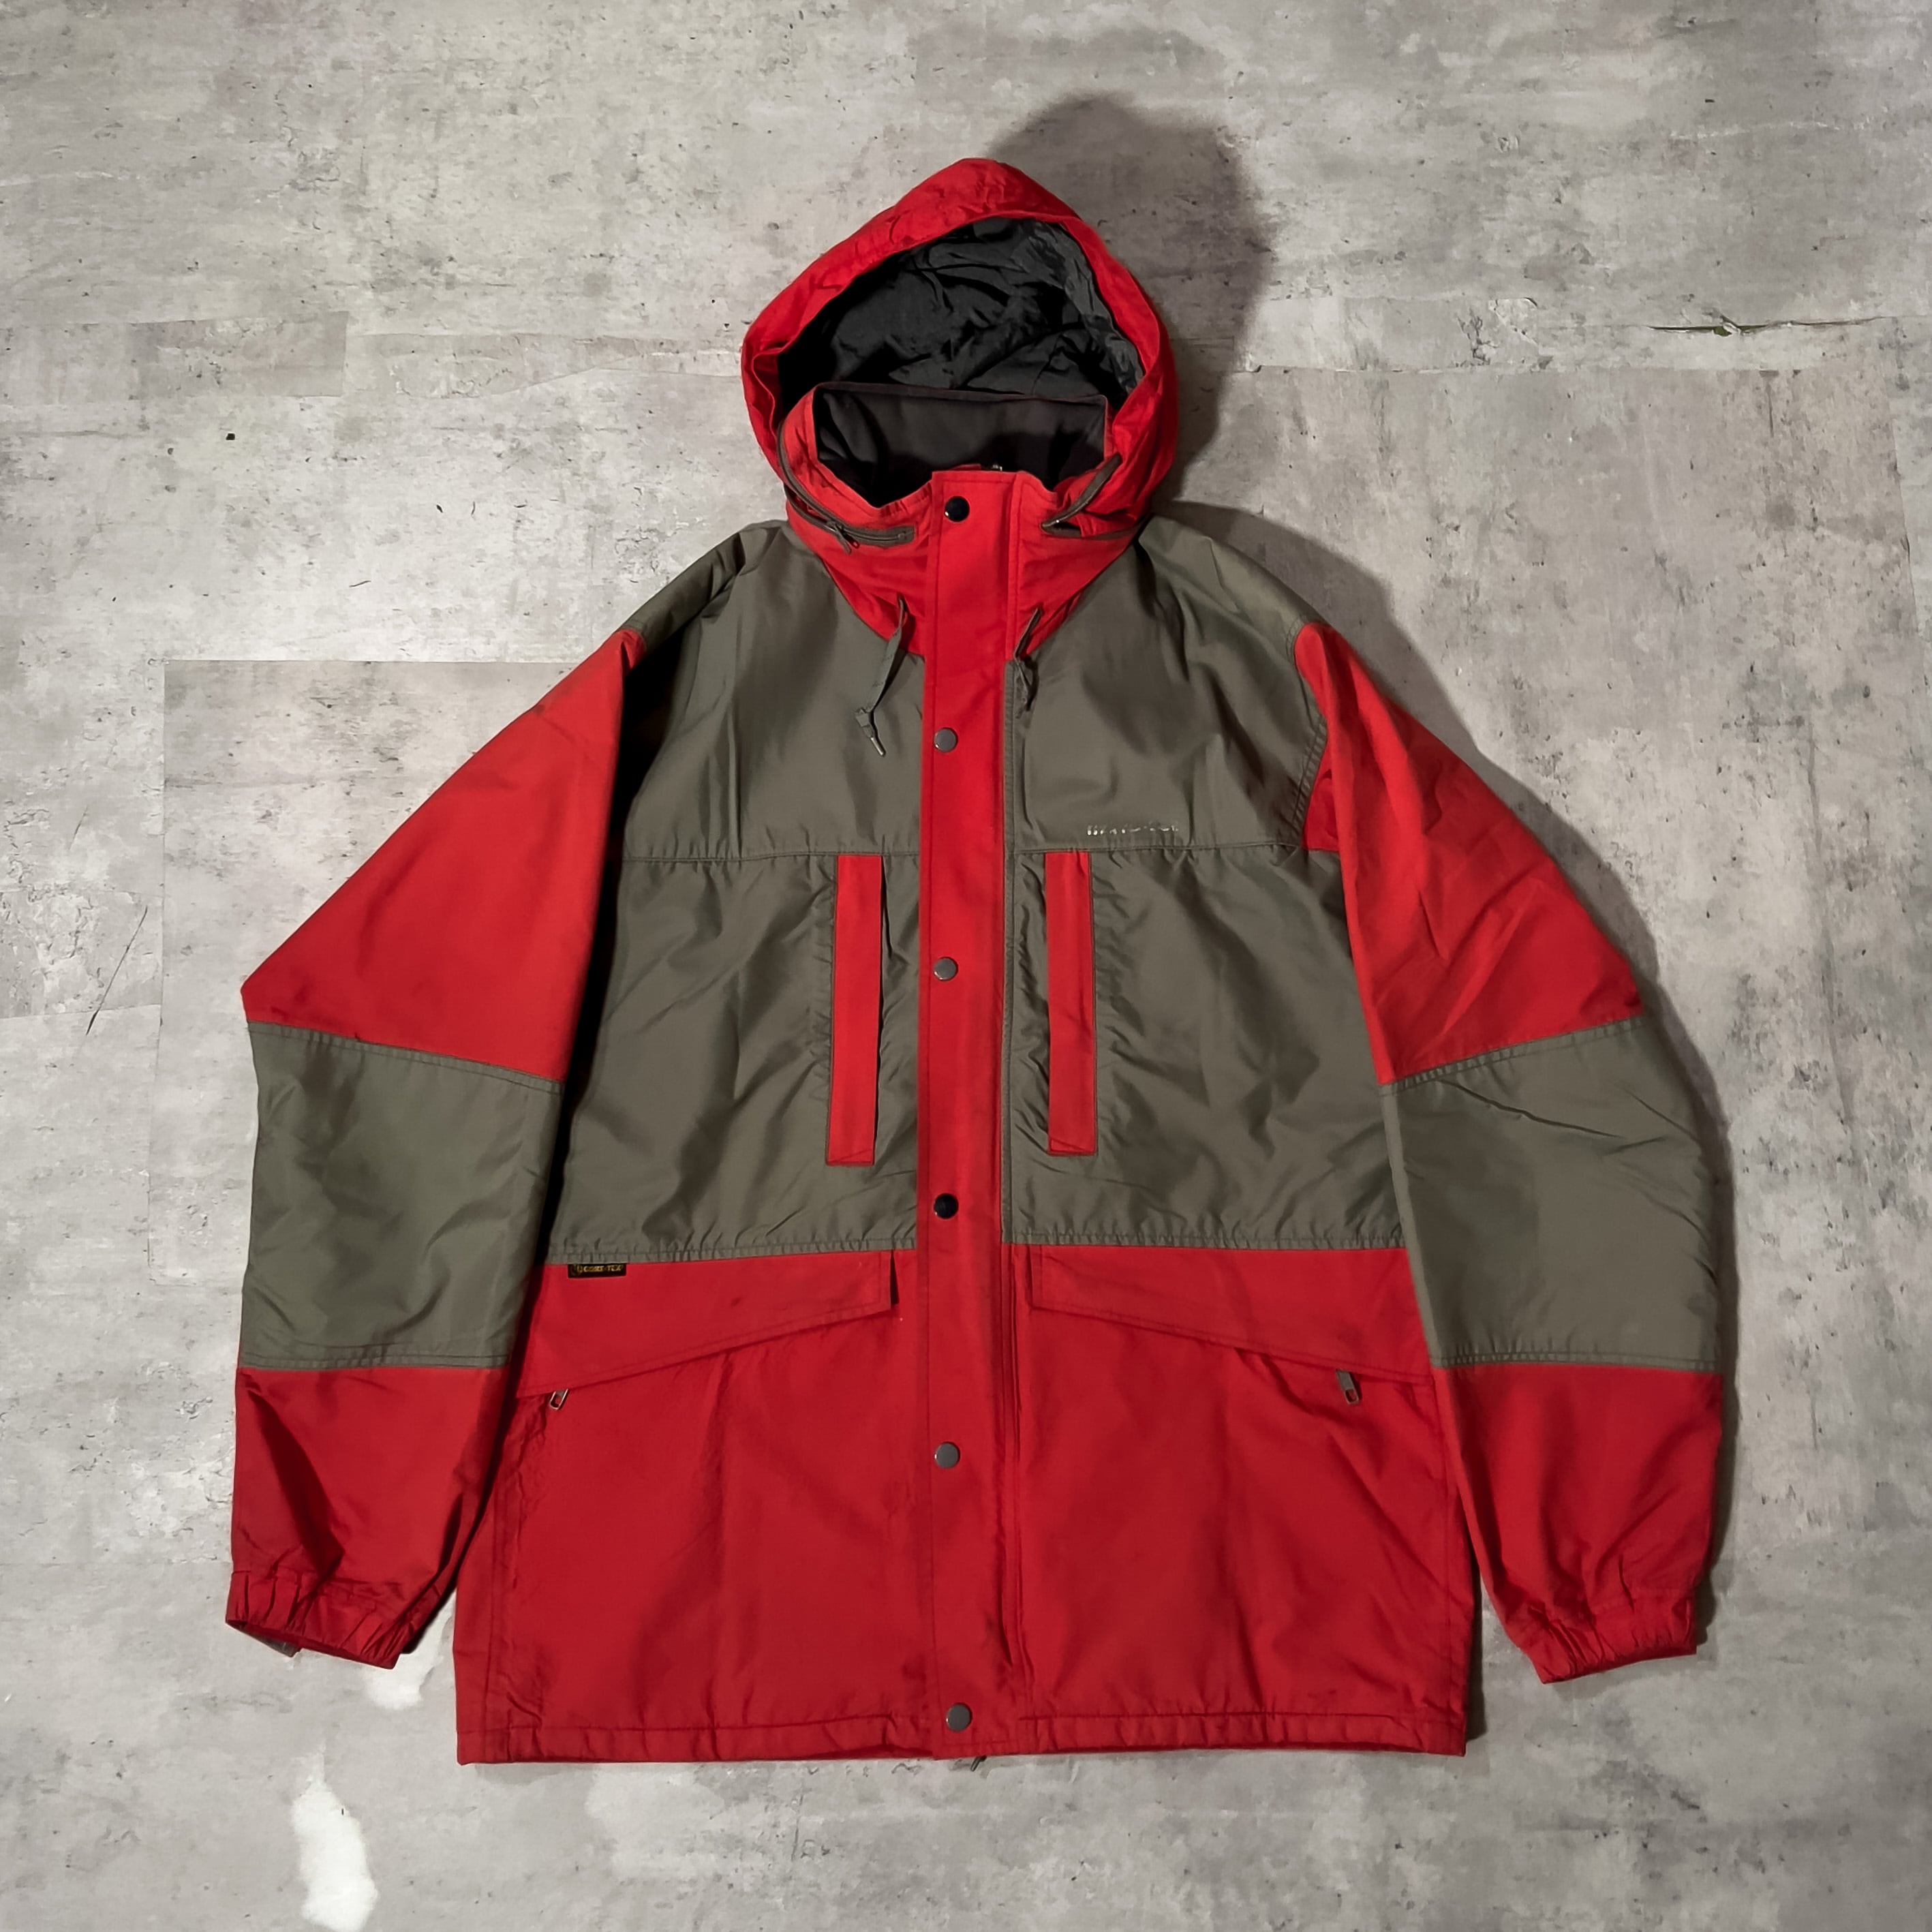 80s “mont-bell” gore-tex mountain parka 80年代 モンベル ゴアテック